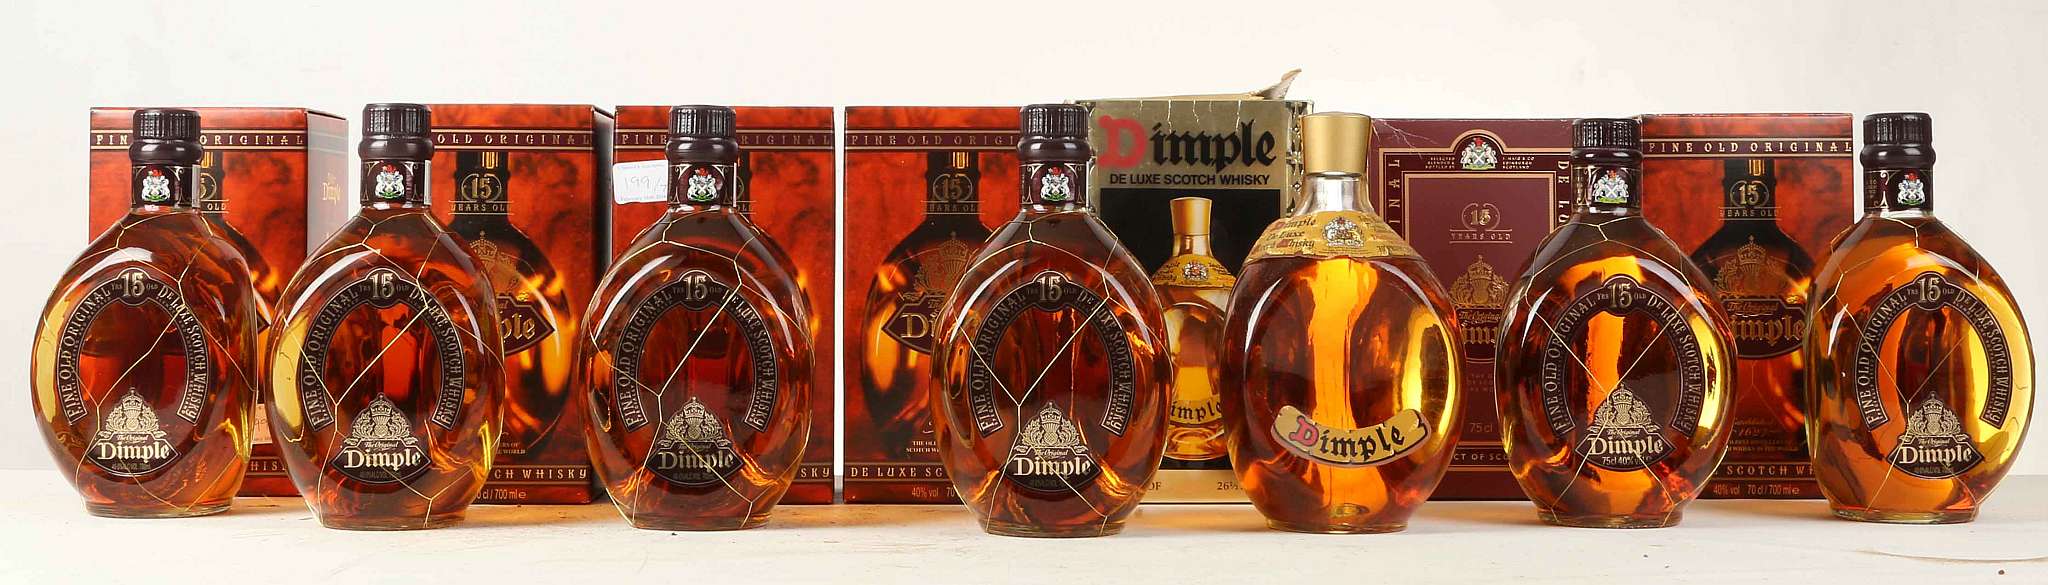 Dimple whisky (7) - Image 2 of 5